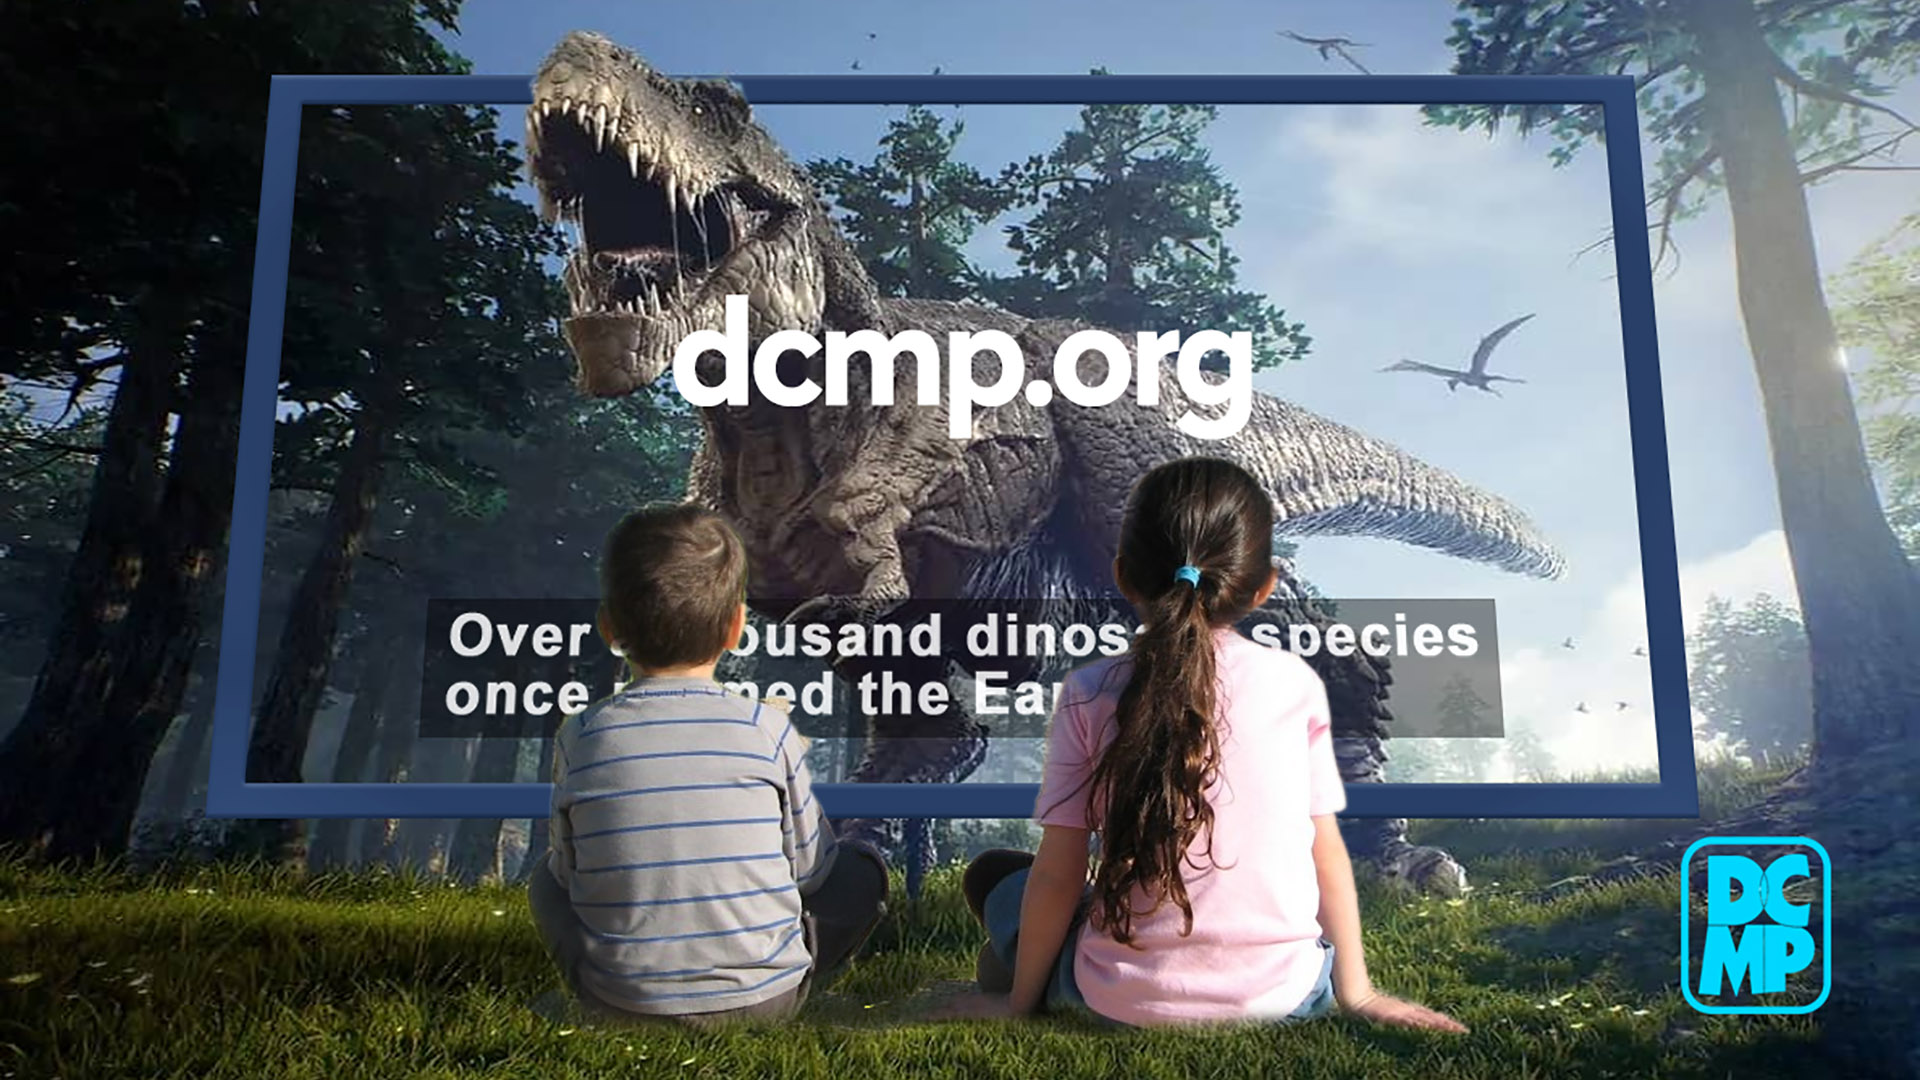 Two children sit in the woods with a large TV screen in front of them showing a 3D T-Rex dinosaur coming through the screen.